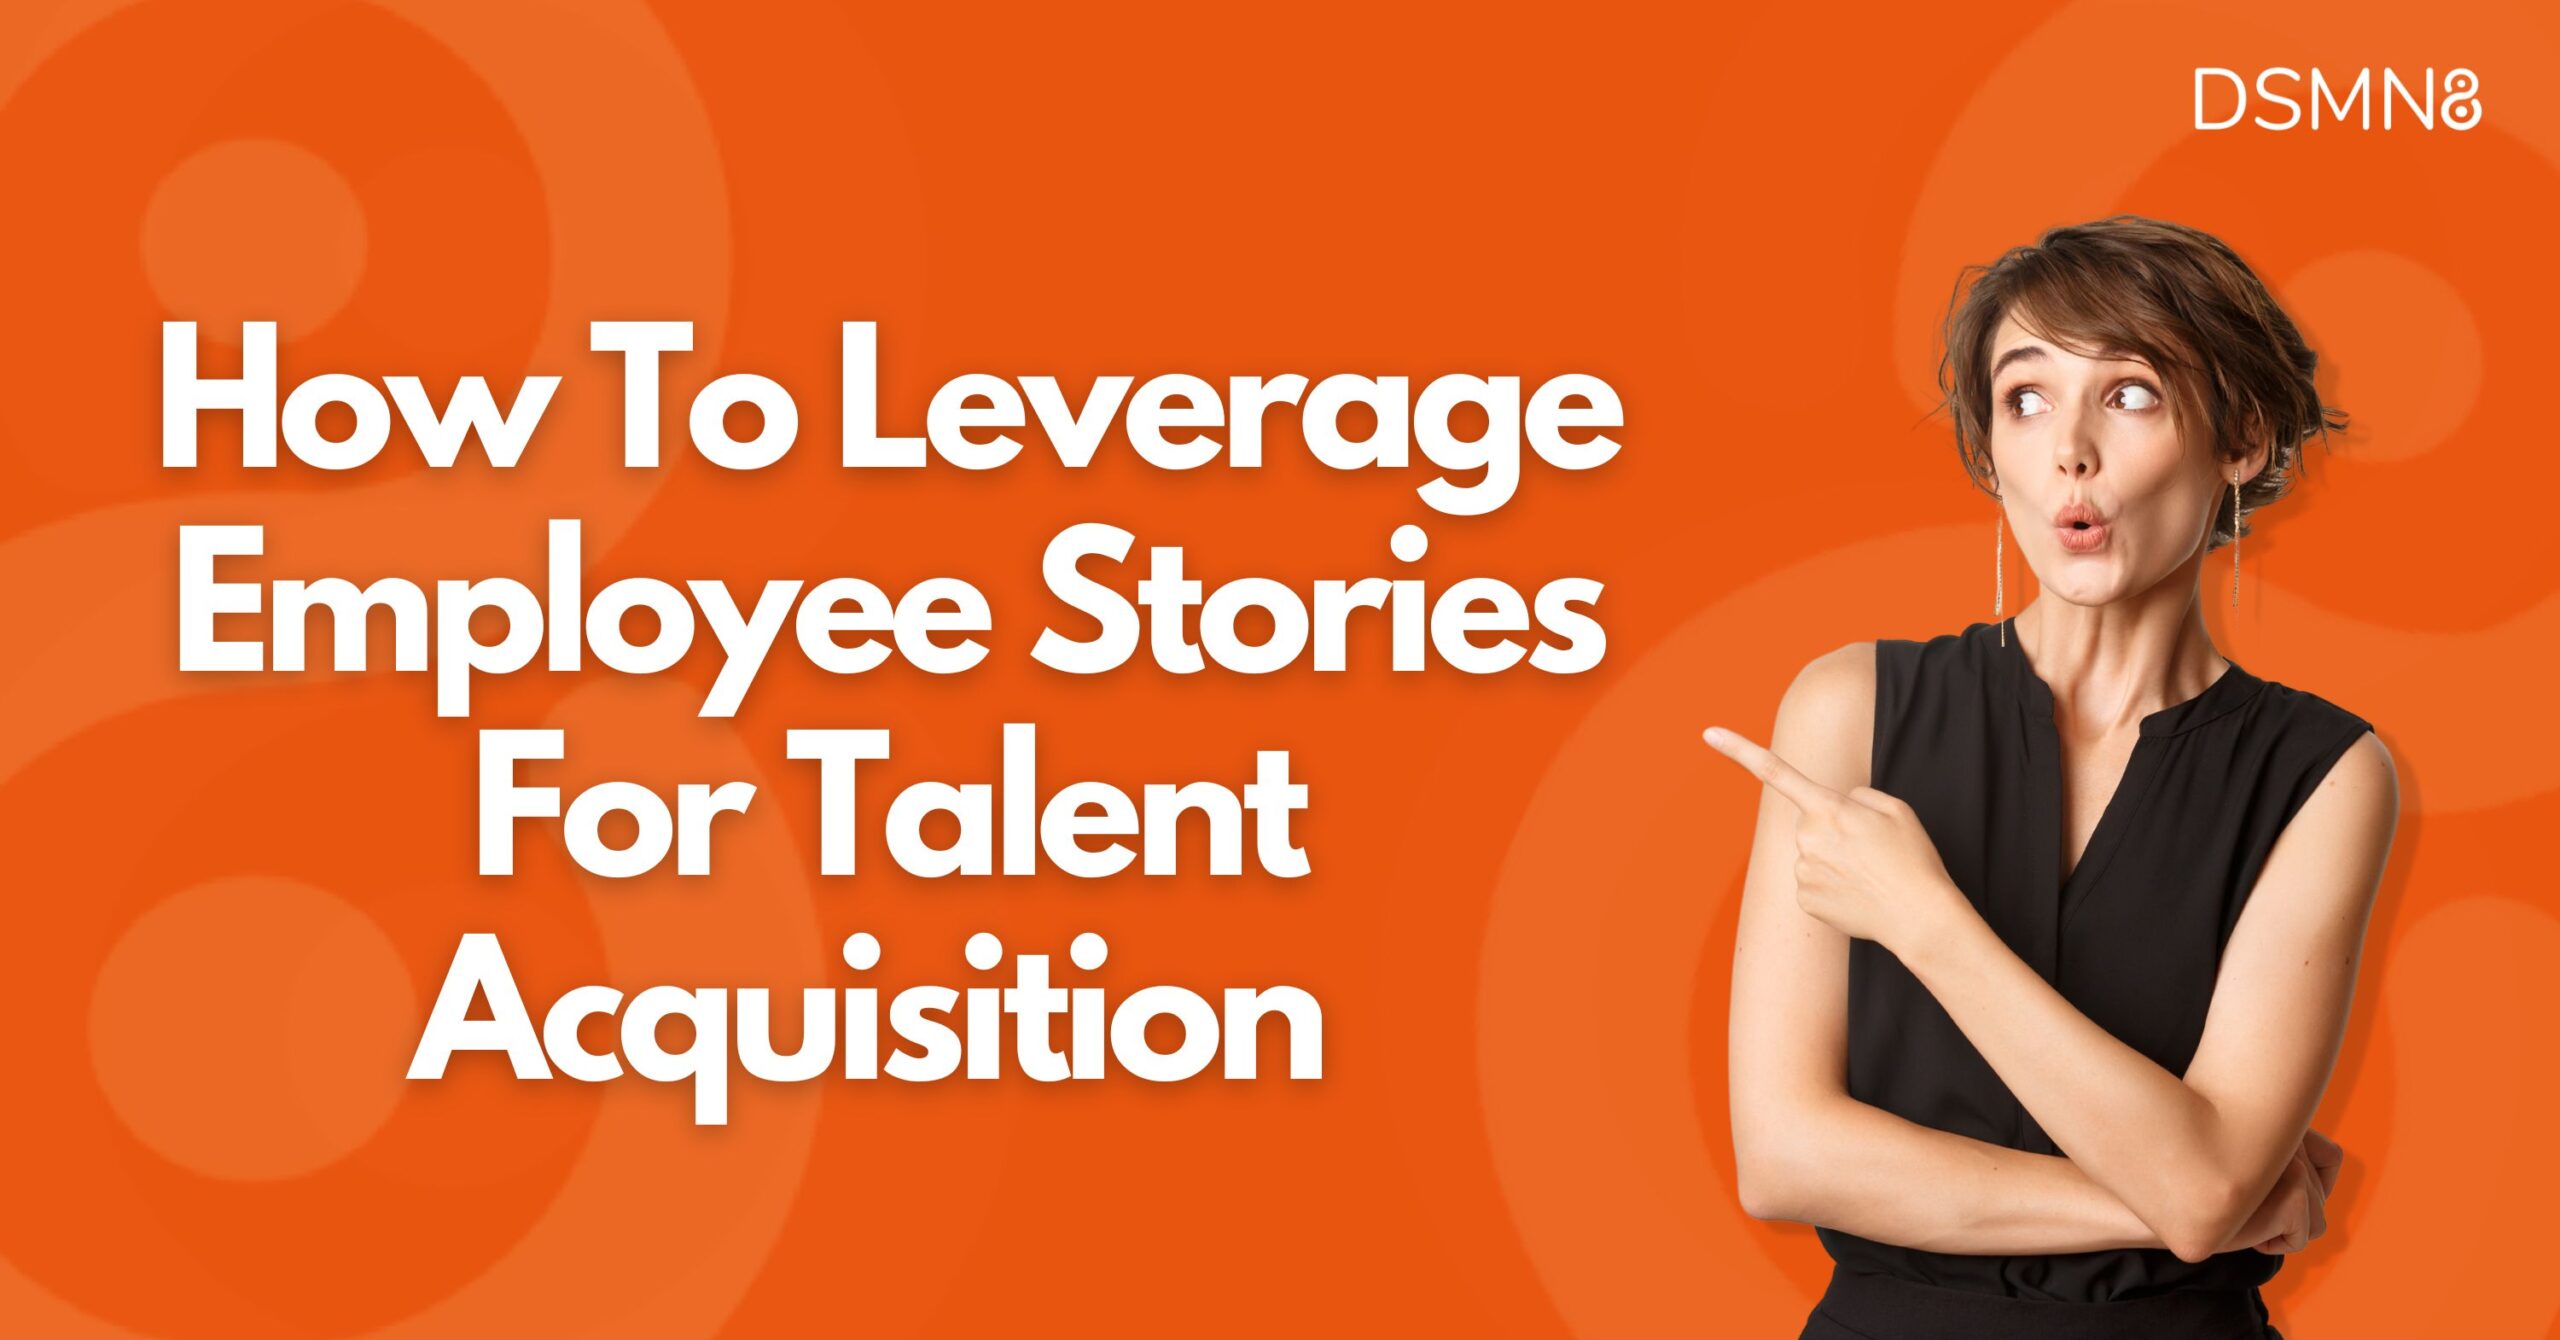 How To Leverage Employee Stories For Talent Acquisition 1